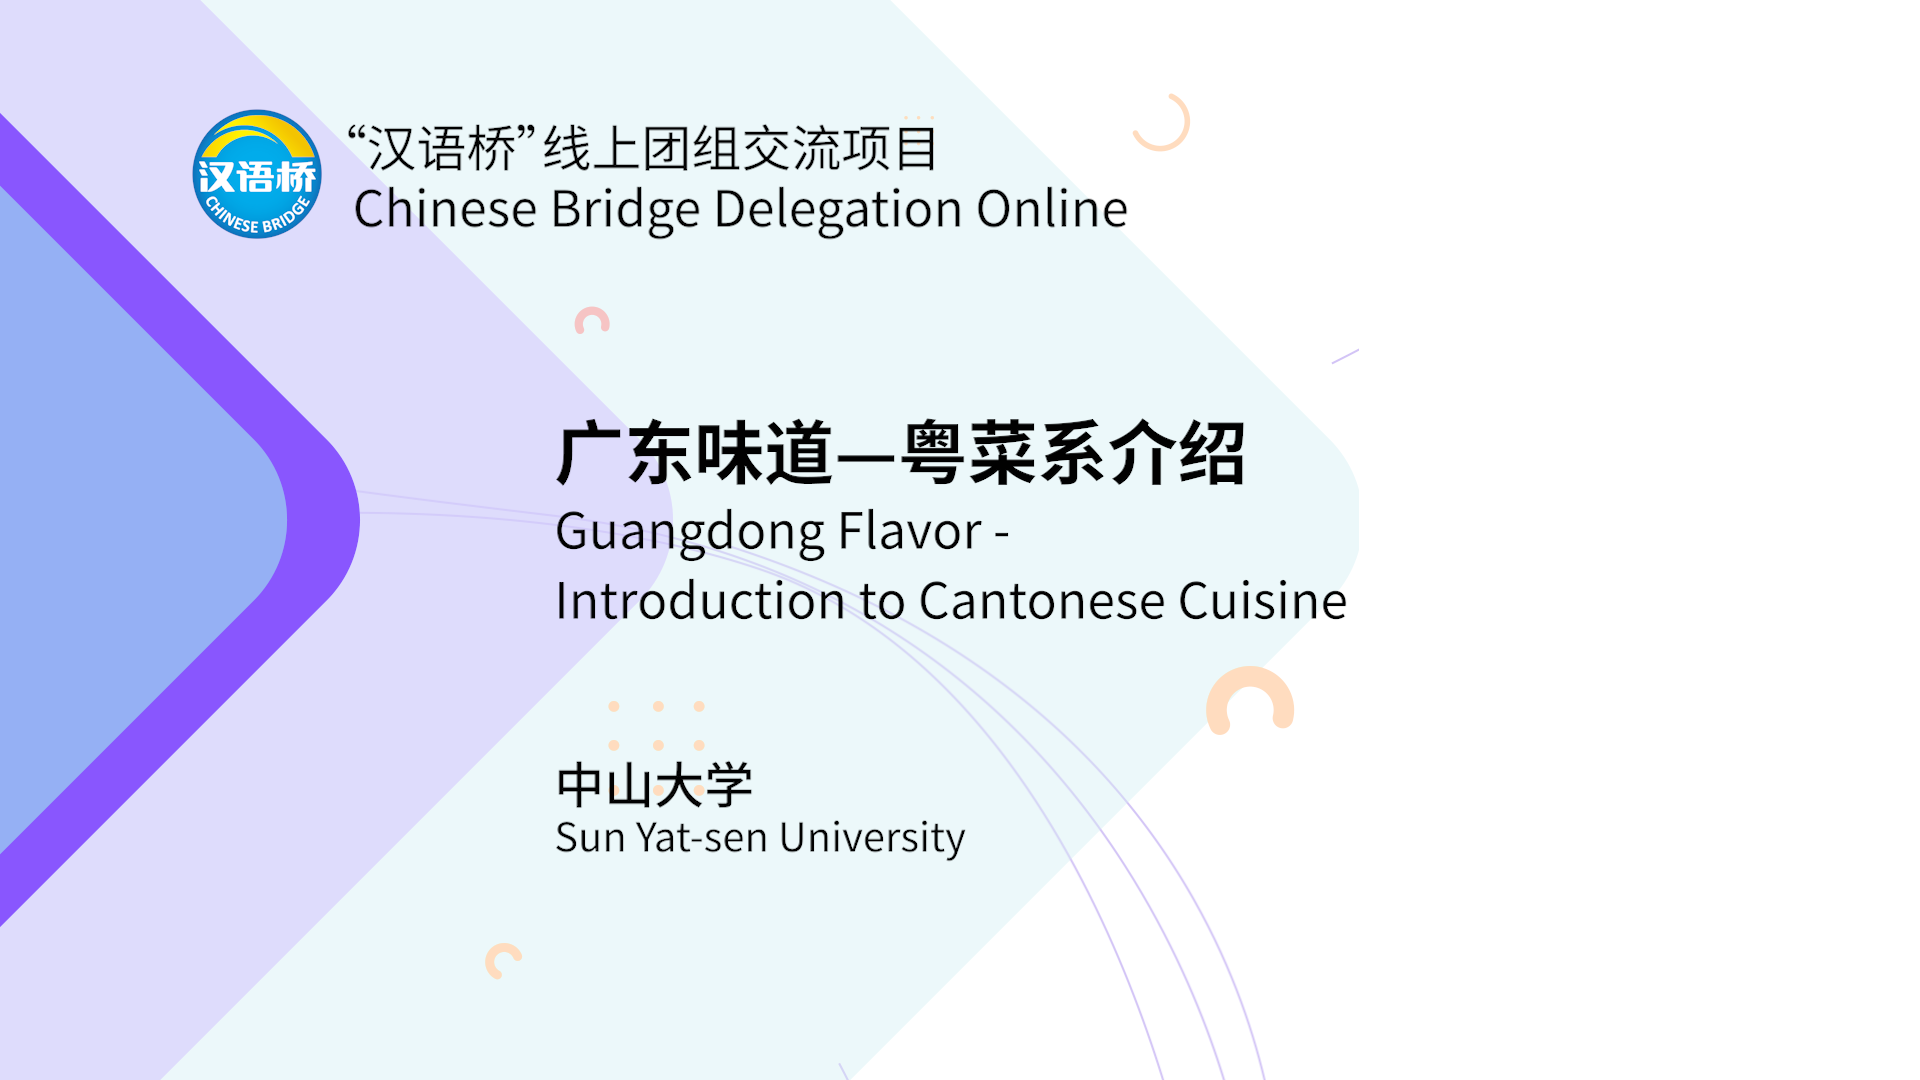 Guangdong Flavor - Introduction to Cantonese Cuisine